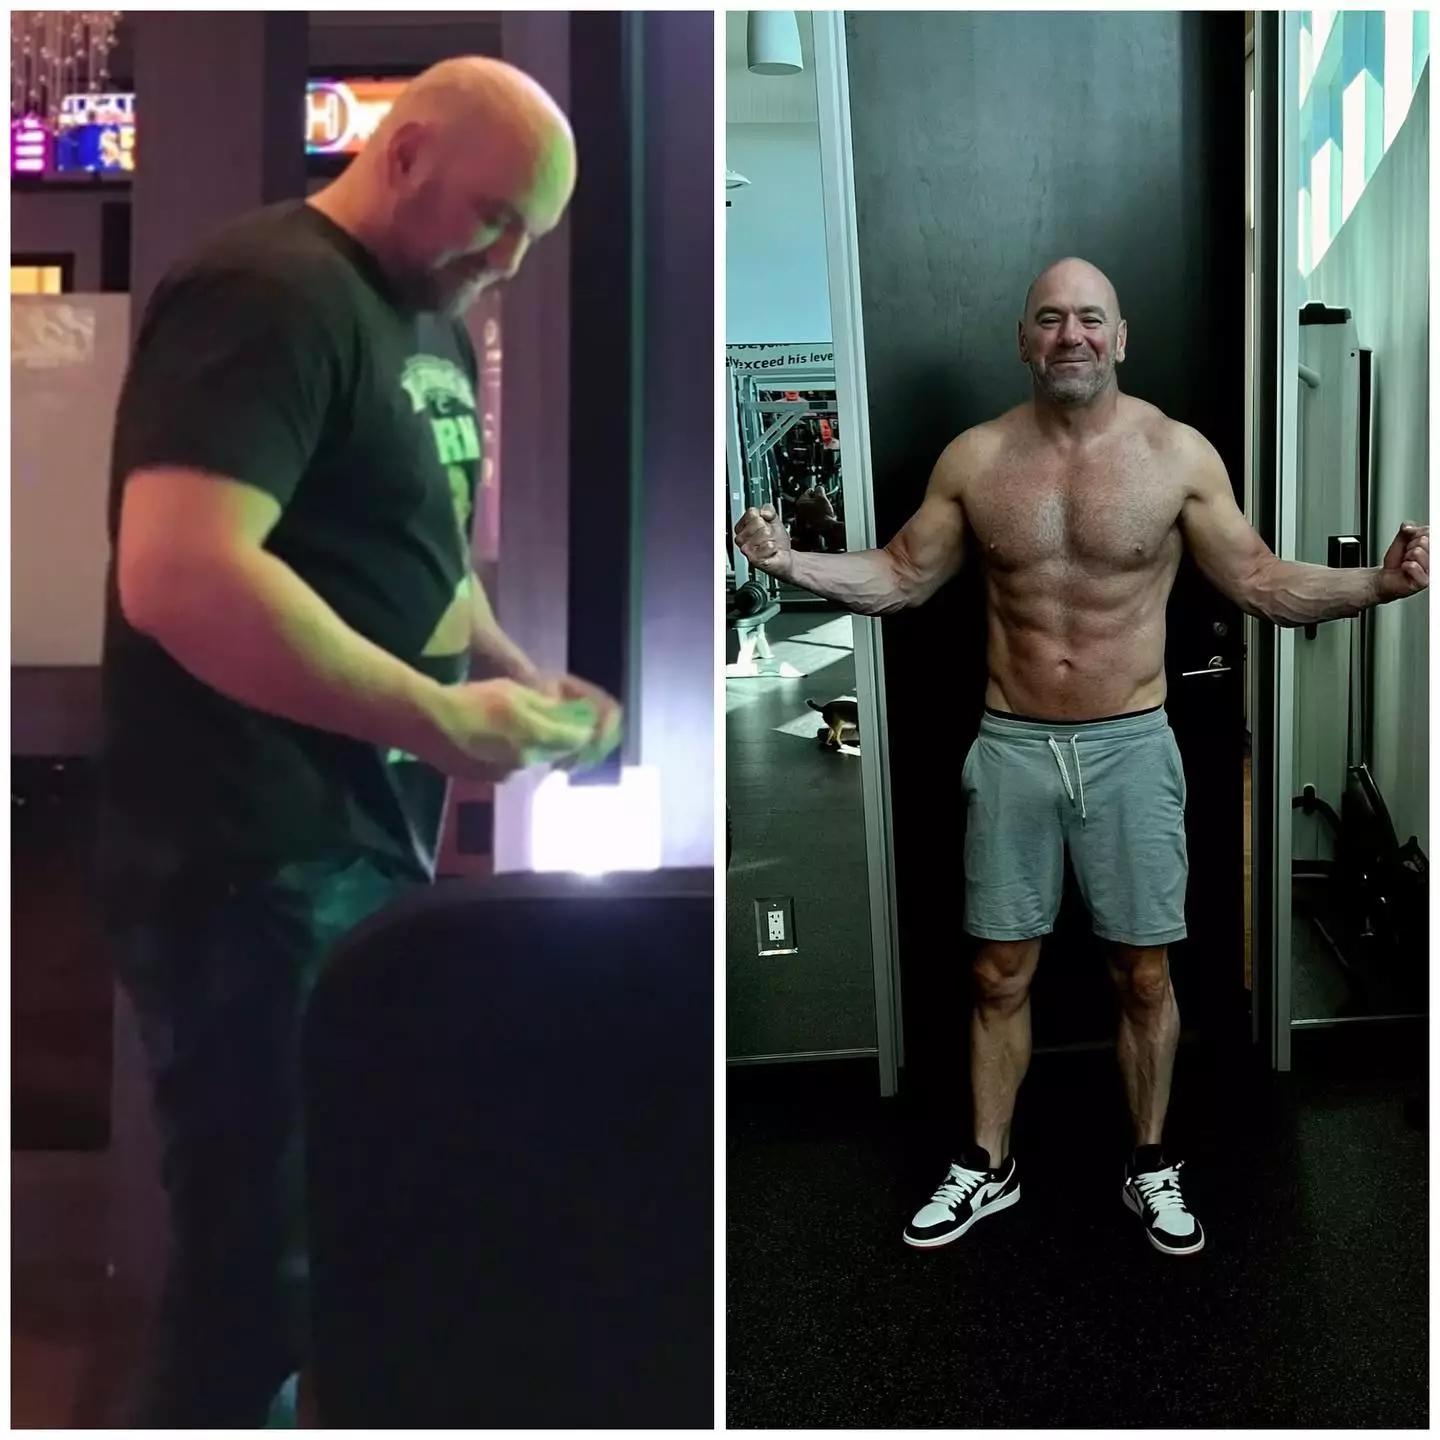 Dana White's fitness transformation is pretty remarkable.